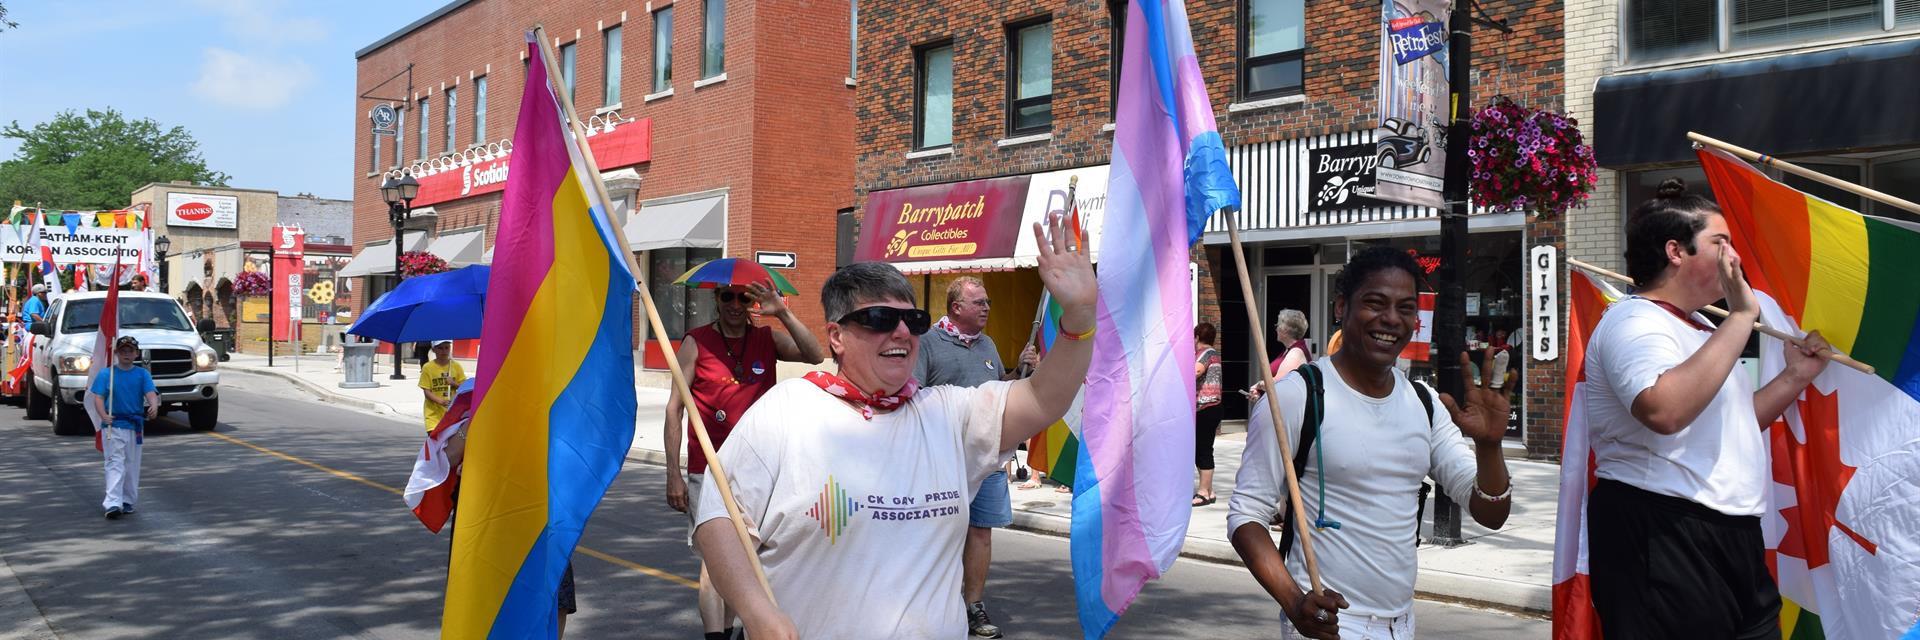 People wearing CK Gay Pride Association shirts and holding a banner in a parade.